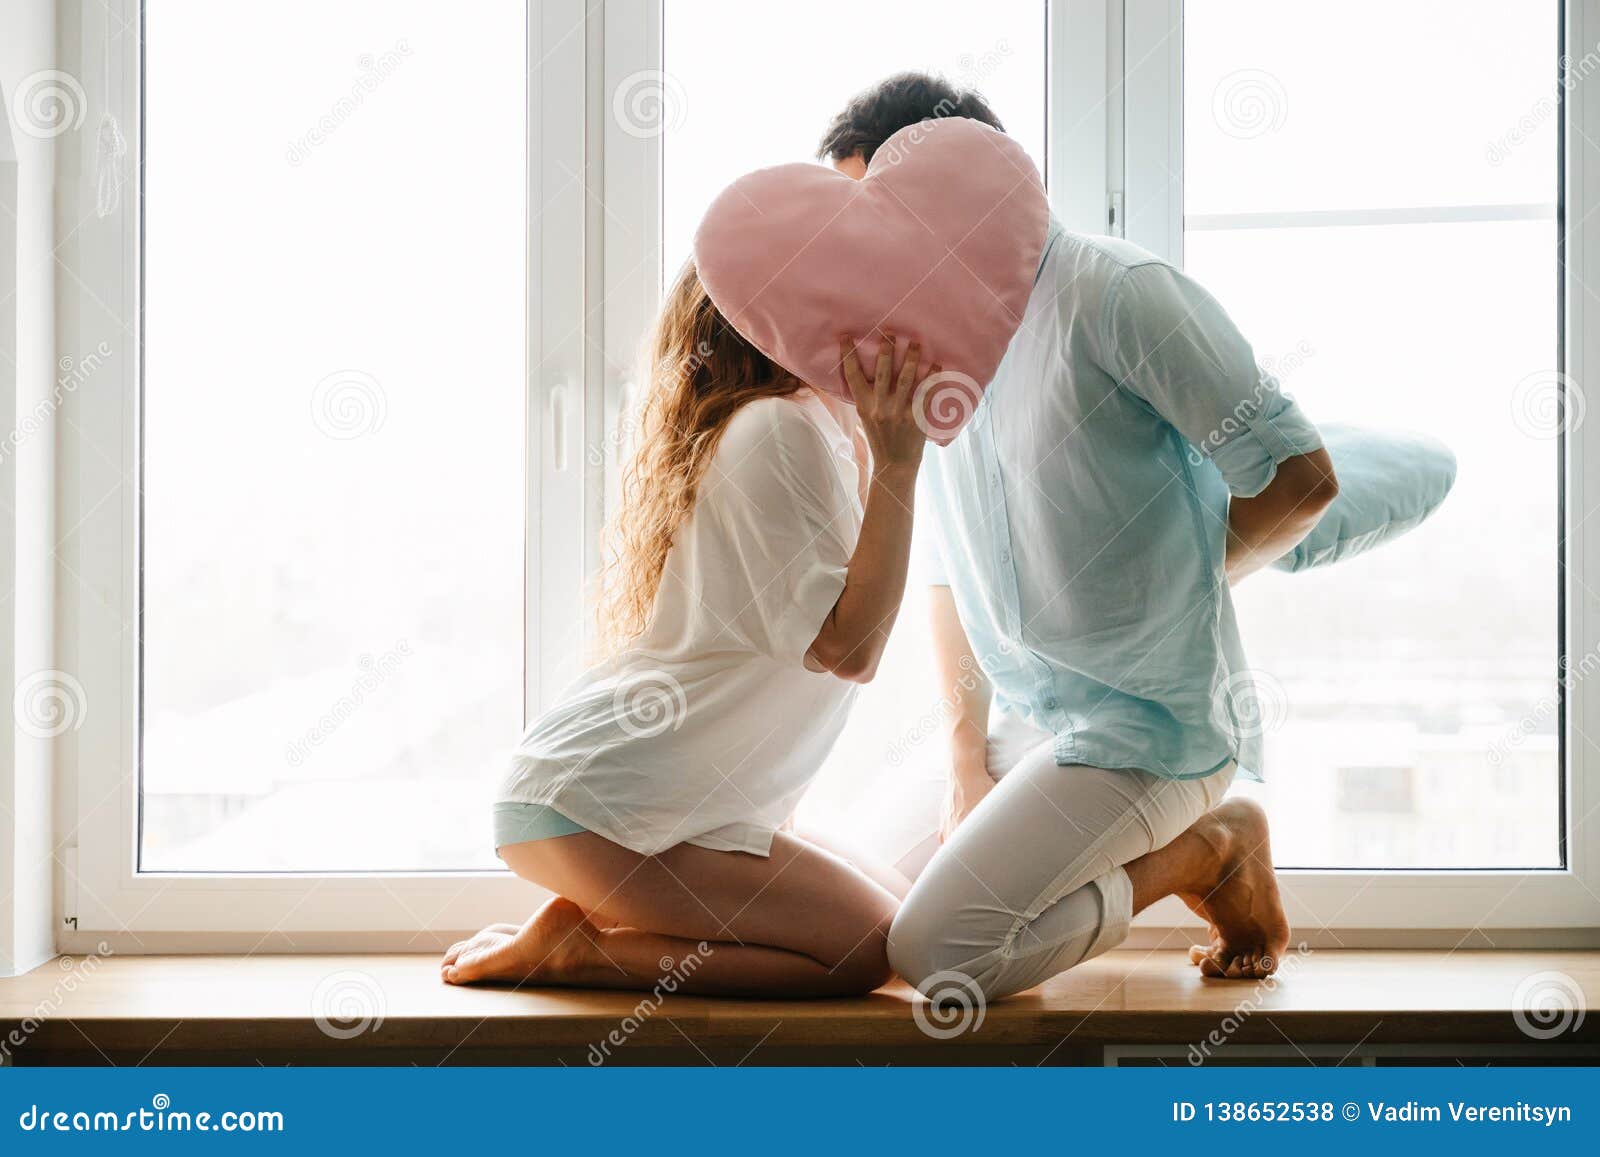 couple girl and guy play with pillows near window.